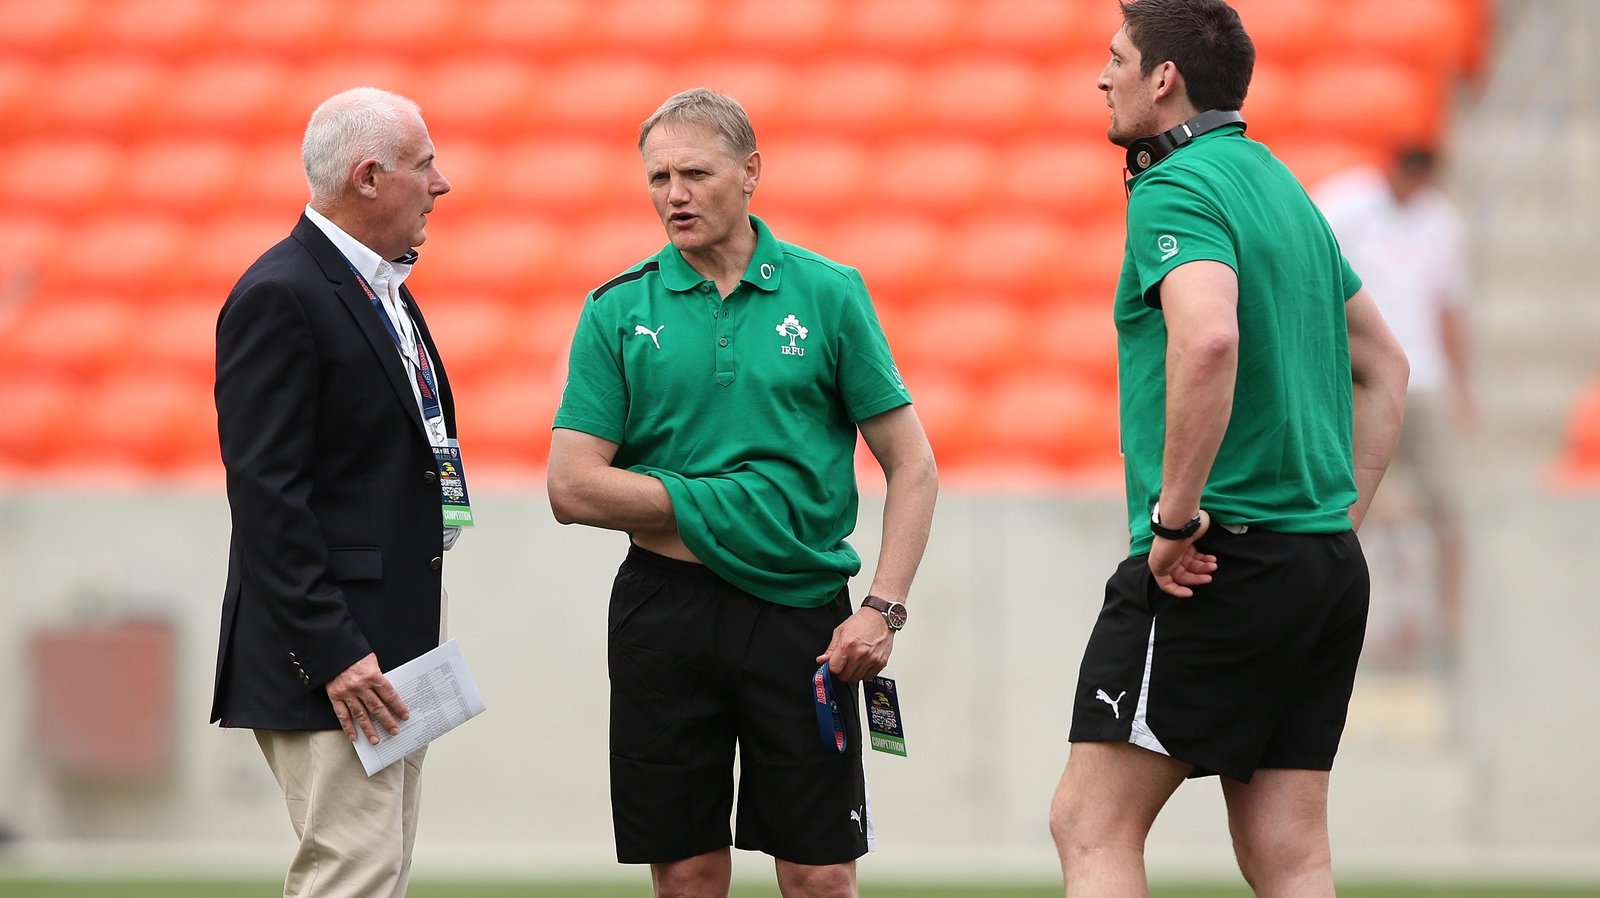 Image - In discussion with Ireland team manager Mick Kearney, left, and head coach Joe Schmidt